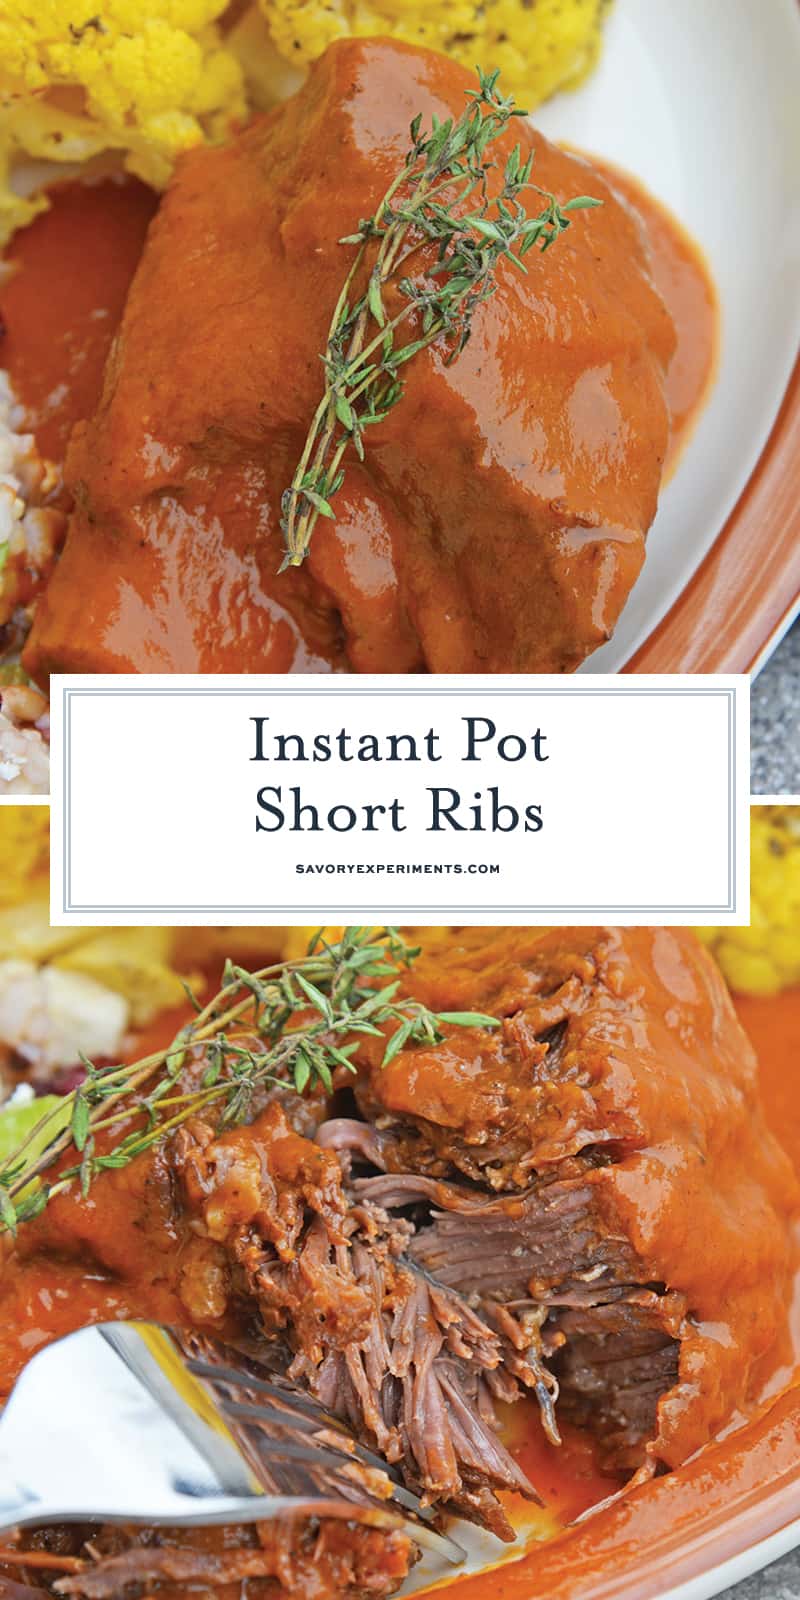 Instant Pot Short Ribs are a fast and flavorful way to make your favorite braised short ribs without all the hard work and hours of cooking. #instantpotshortribs #braisedshortribs #shortribsrecipe www.savoryexperiments.com